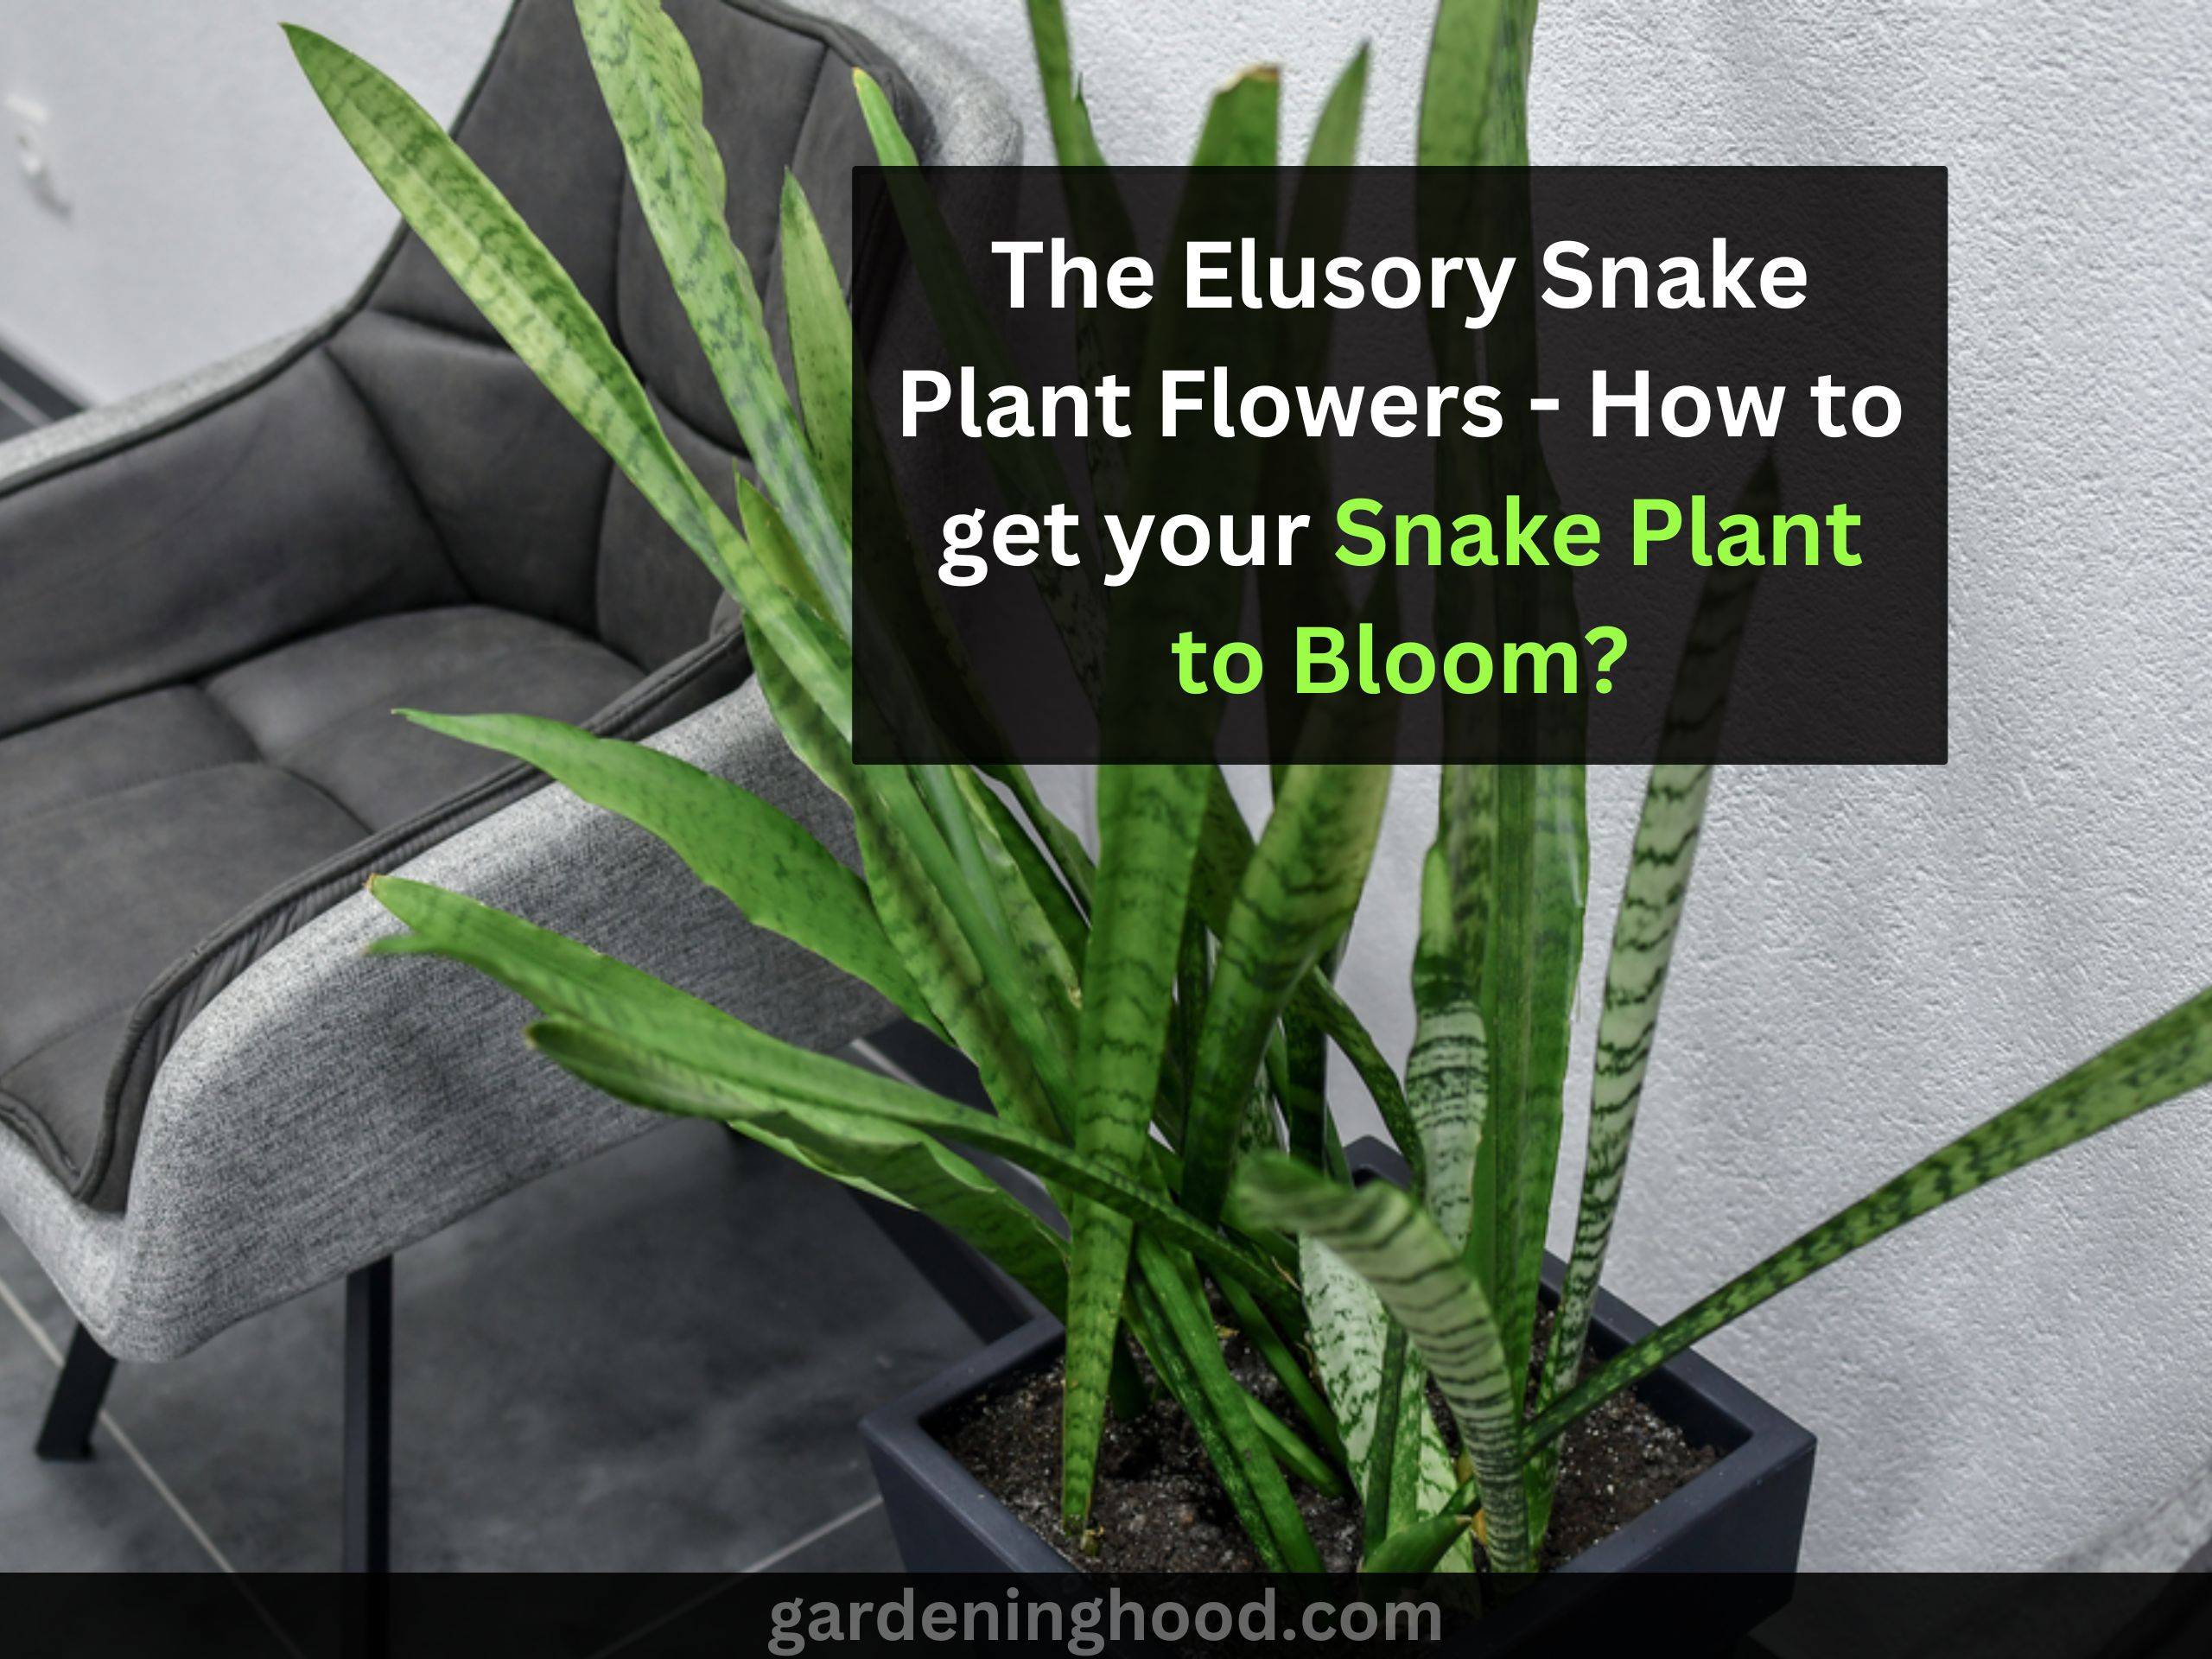 The Elusory Snake Plant Flowers - How to get your Snake Plant to Bloom?